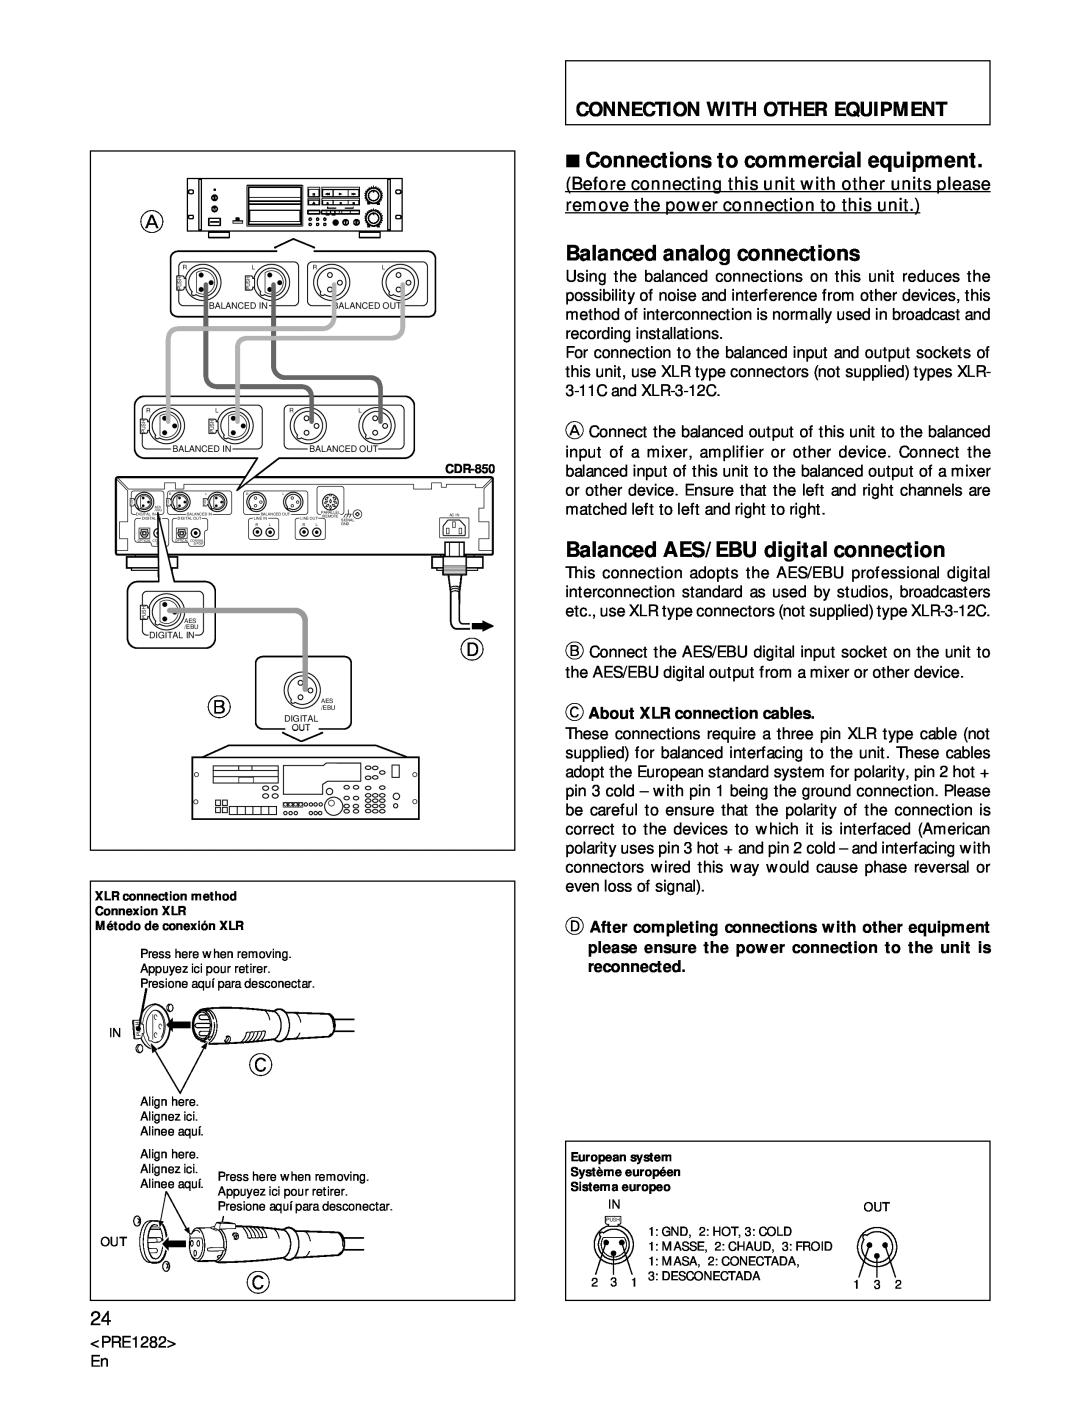 Americana Appliances CDR-850 manual Connection With Other Equipment, 7Connections to commercial equipment 